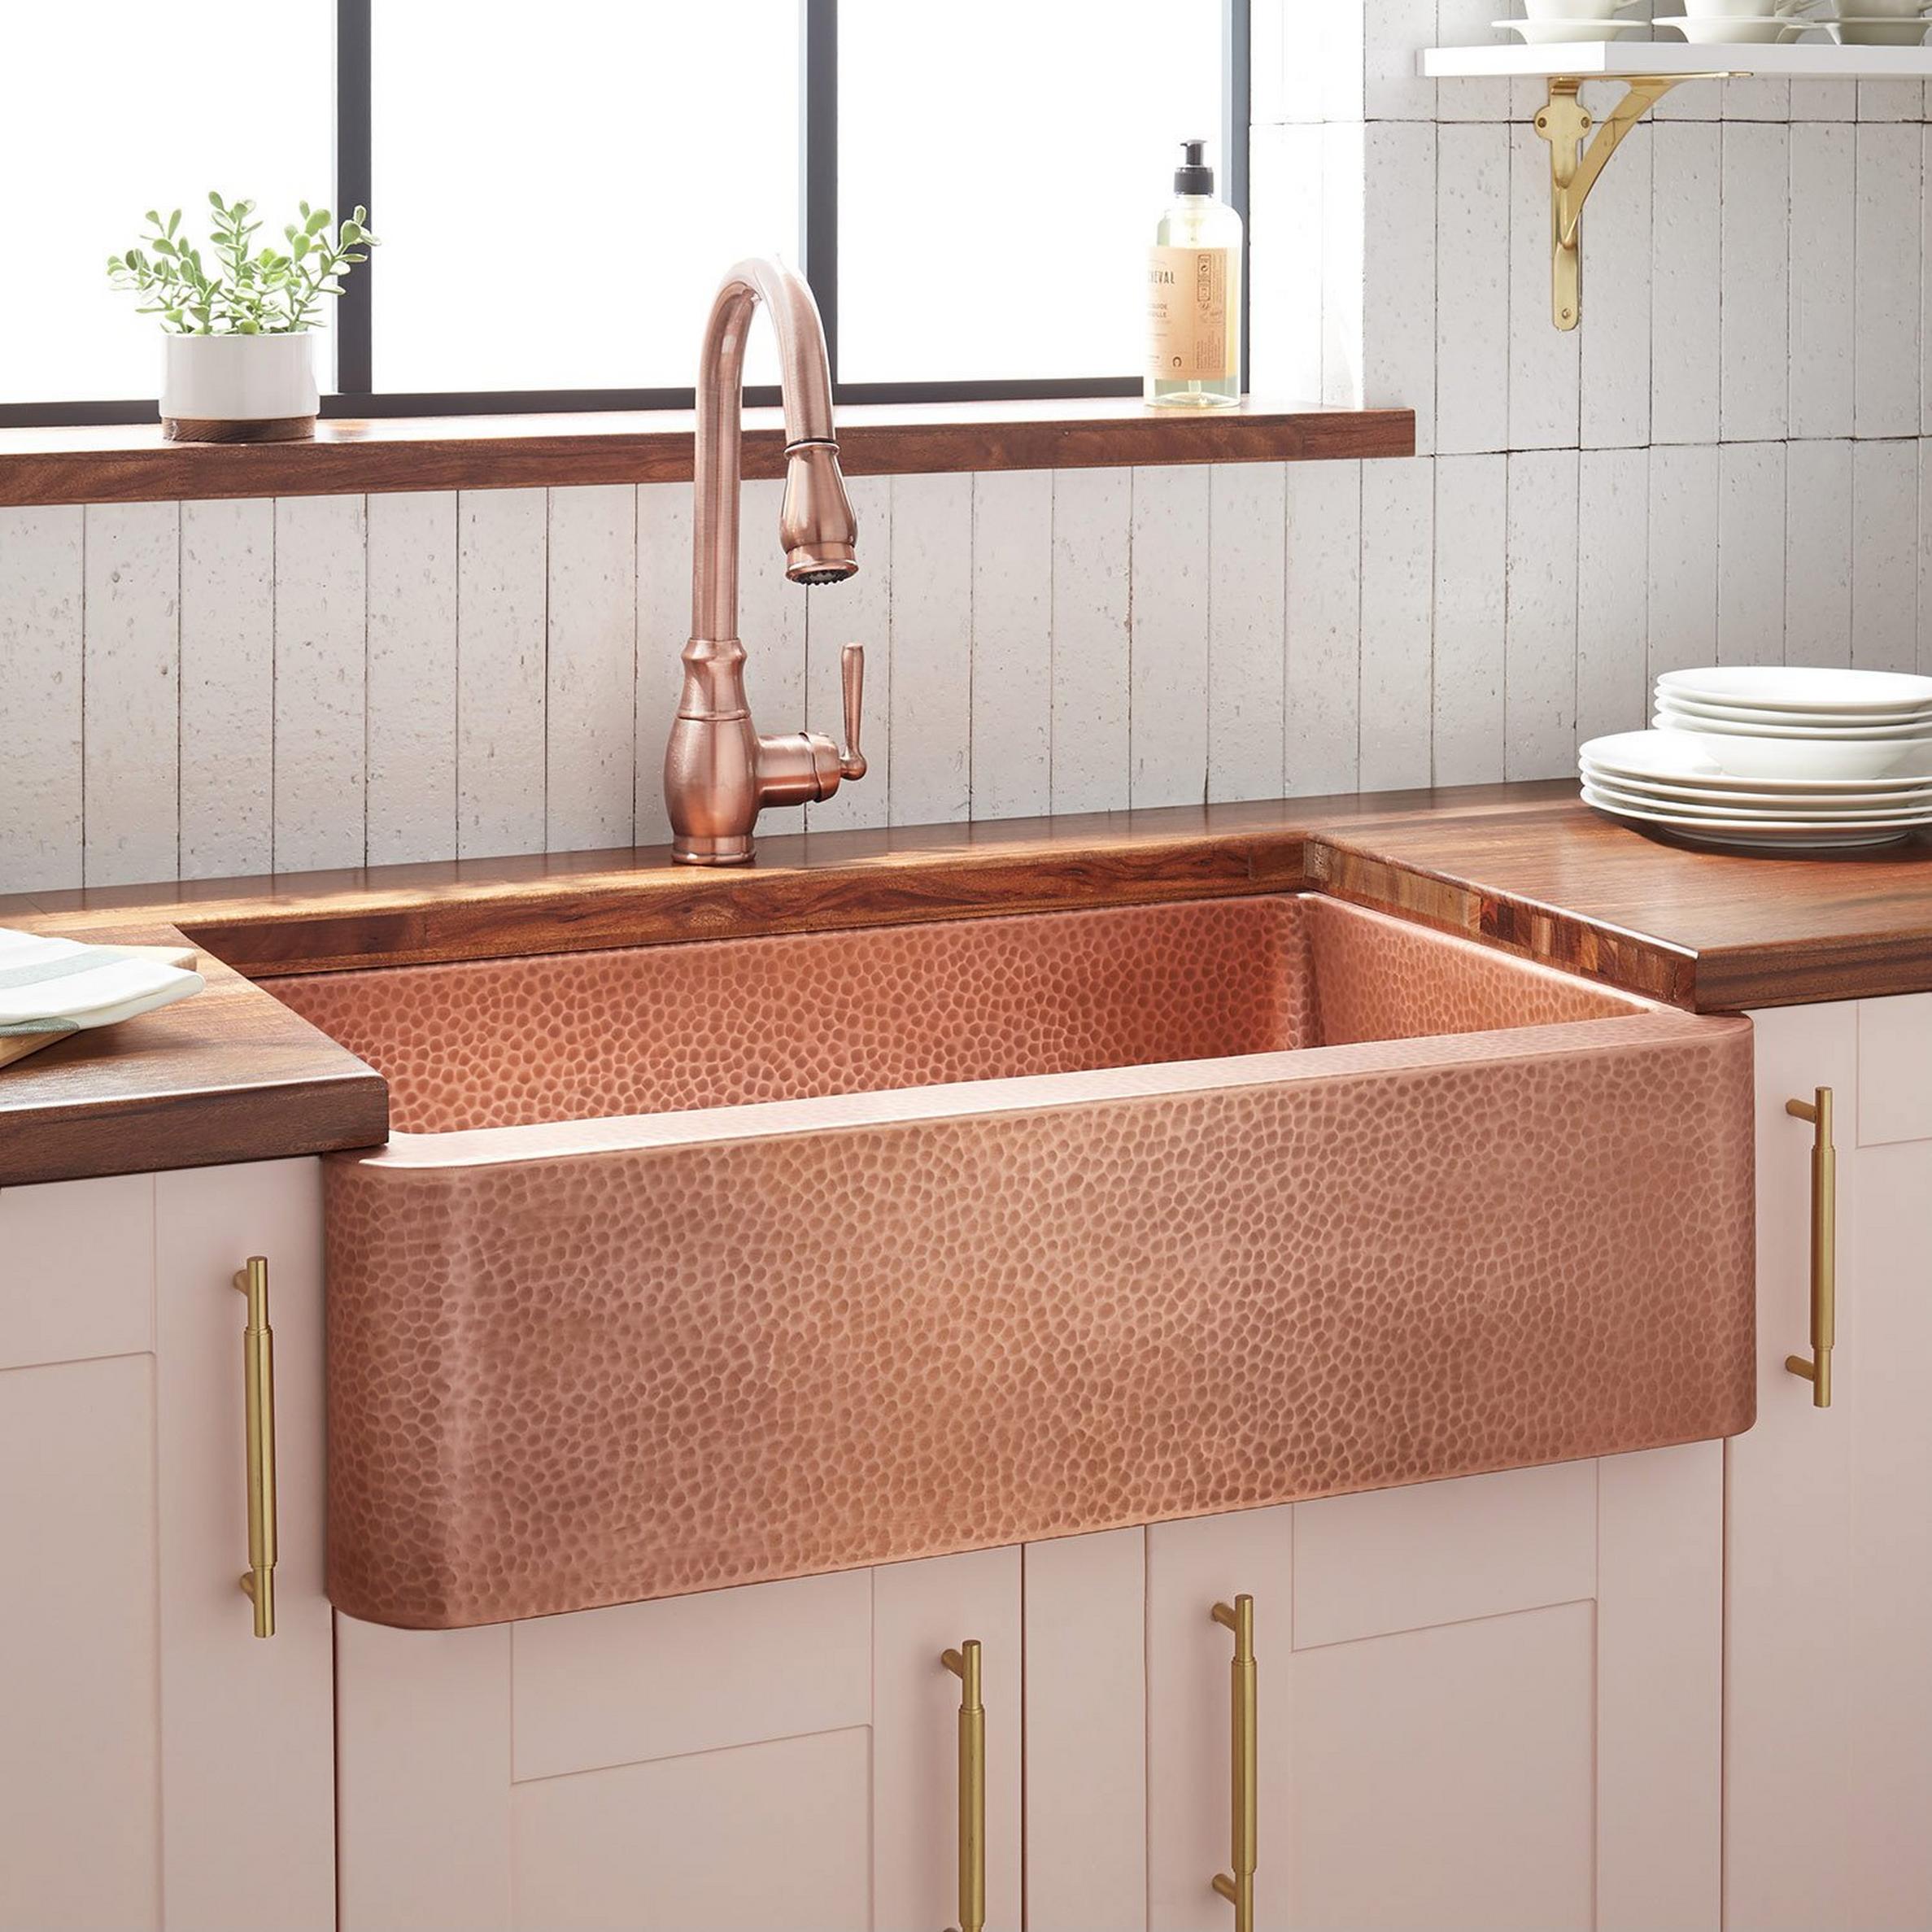 427341 Farmhouse Sink Hammered Copper 30 Beauty10 ?w=2375&fmt=auto